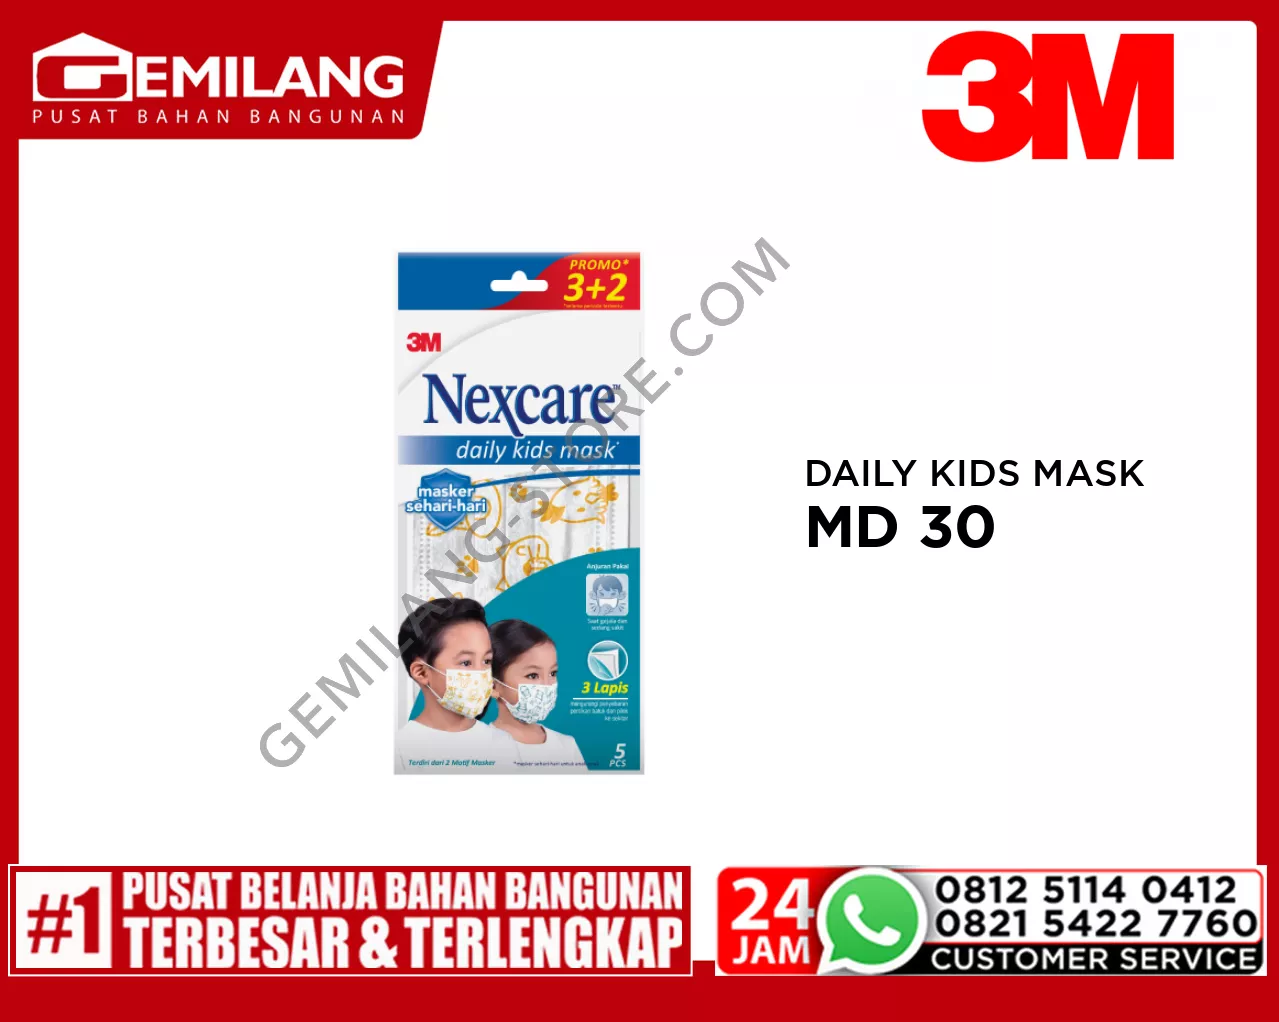 3M NEXCARE DAILY KIDS MASK MD 30